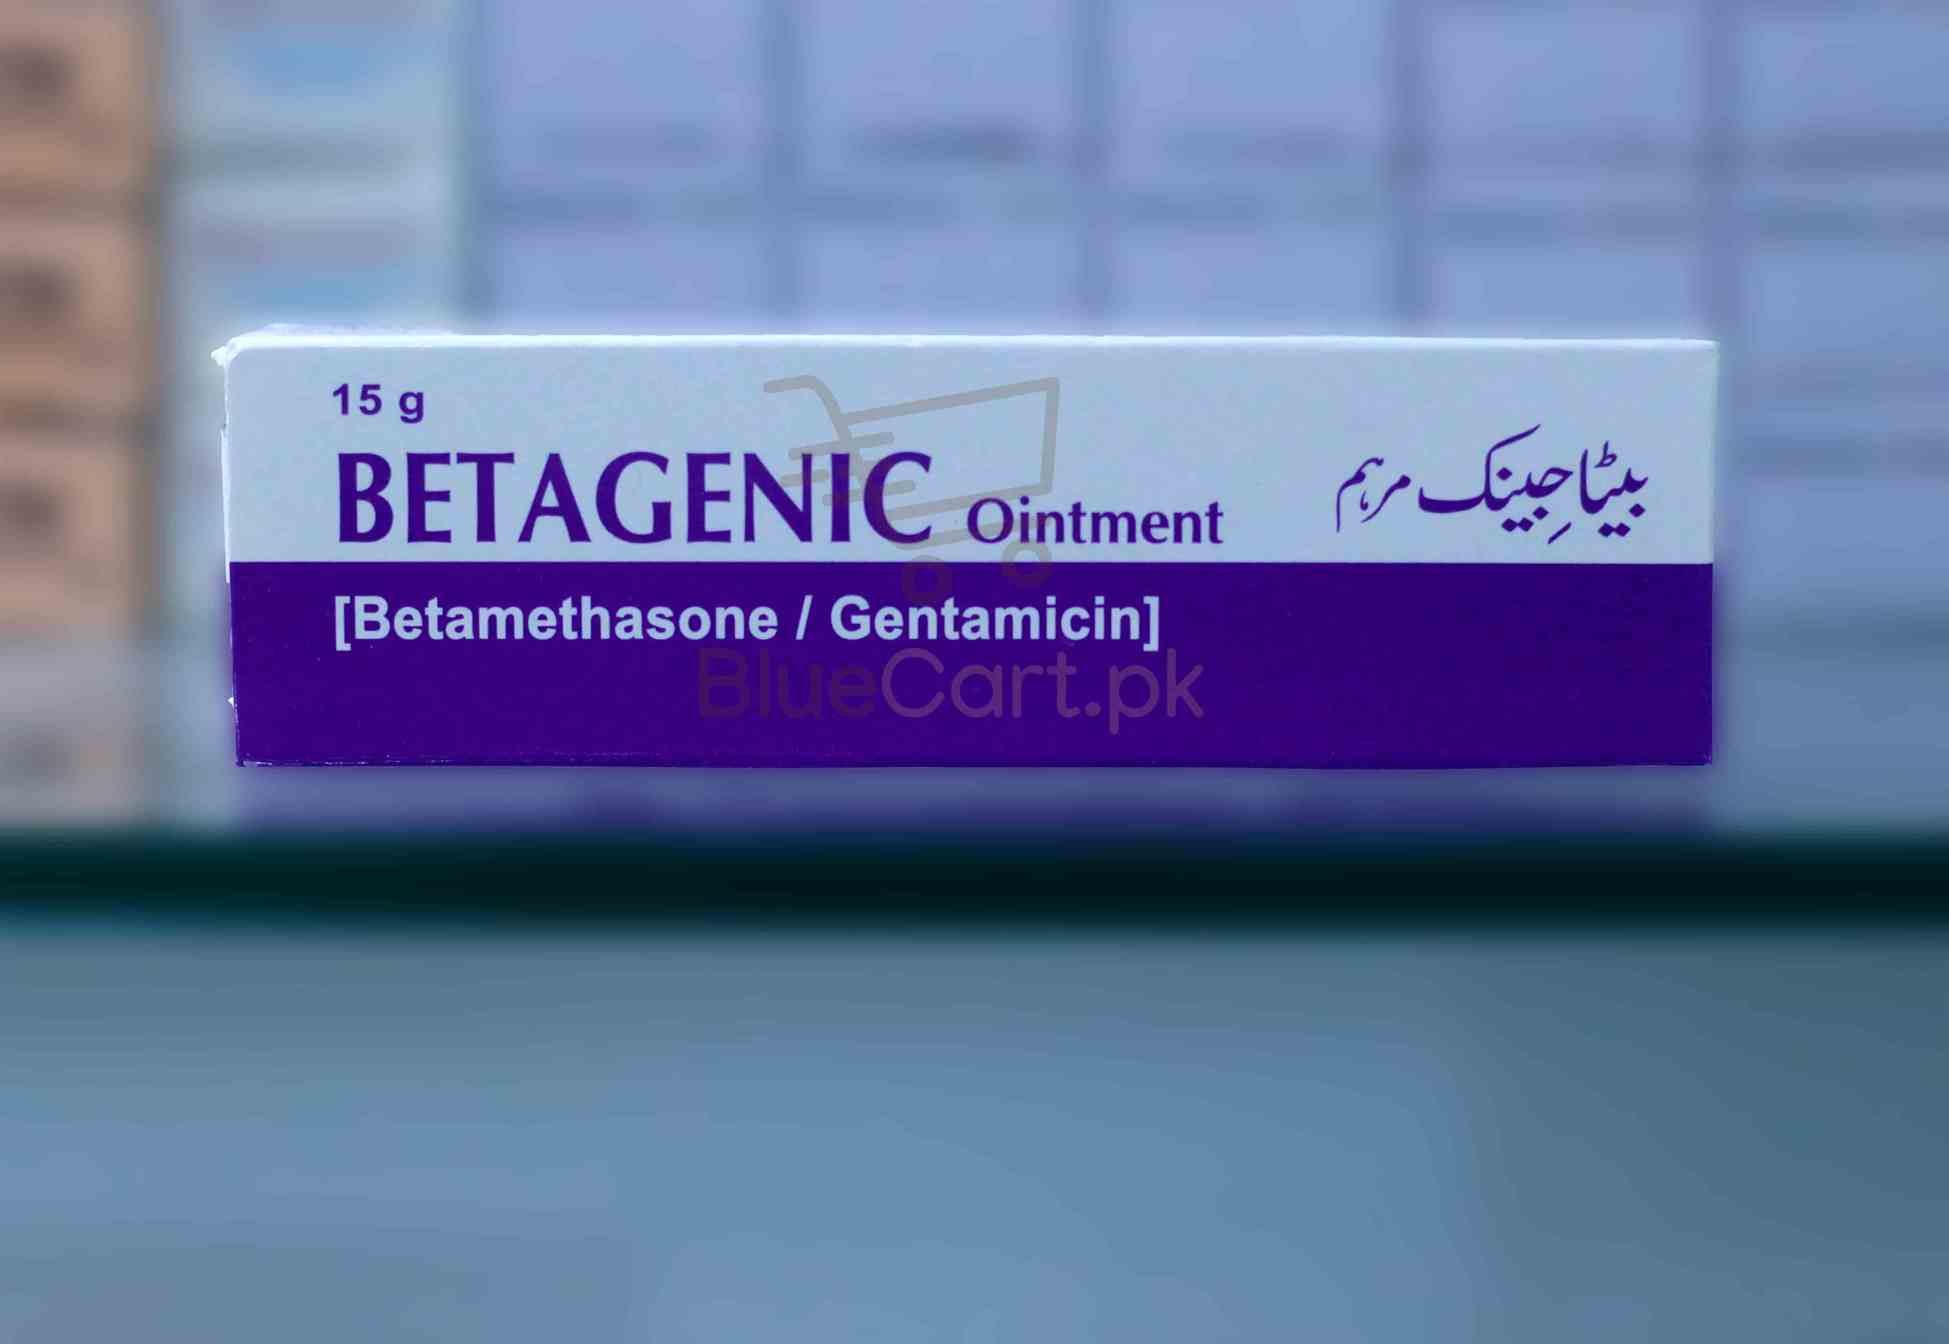 Betagenic Ointment